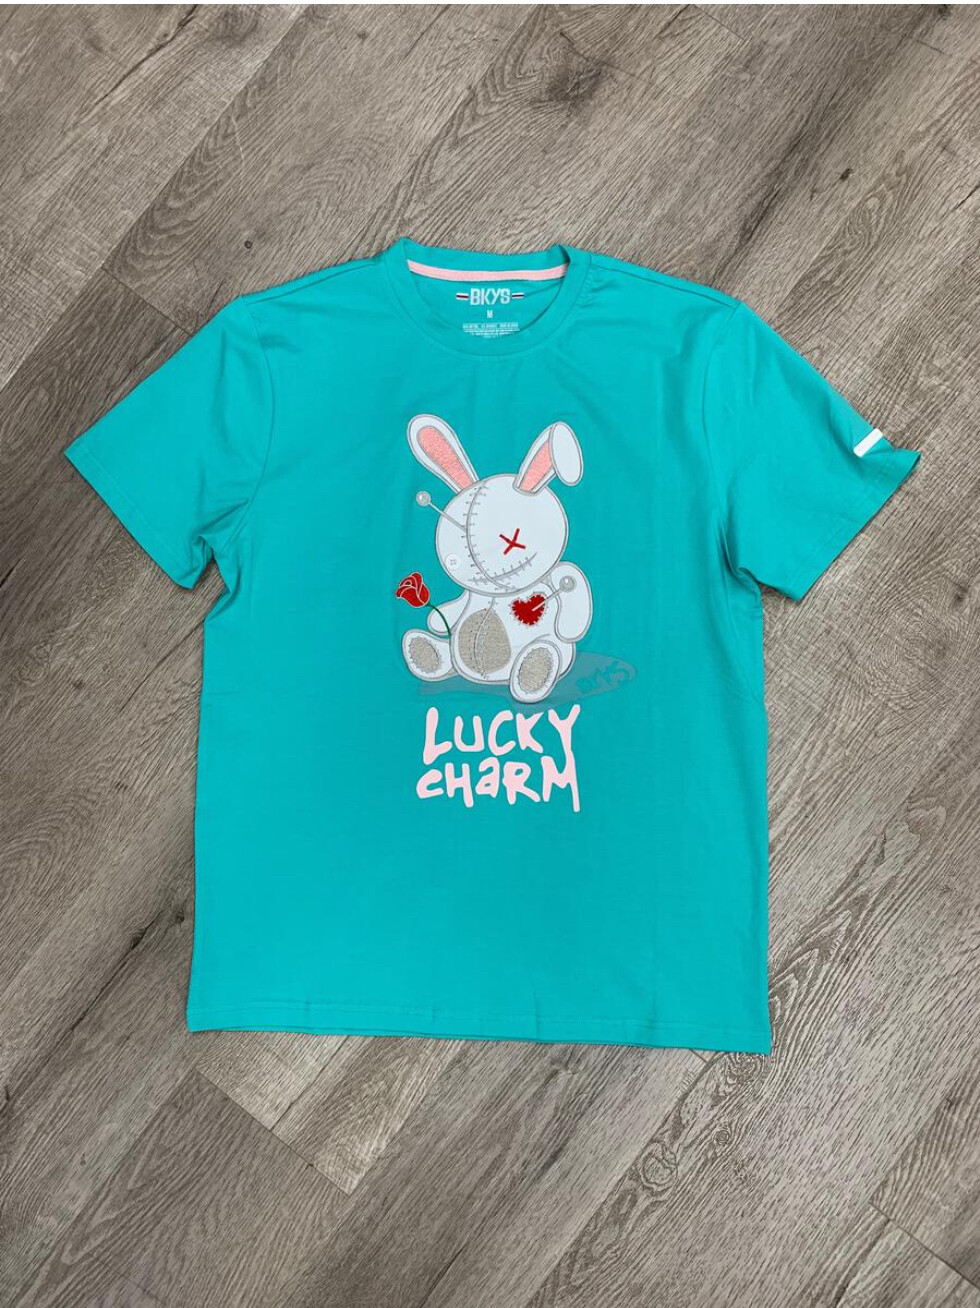 Guess major slit BKYS Lucky Charm T-Shirt Teal and White